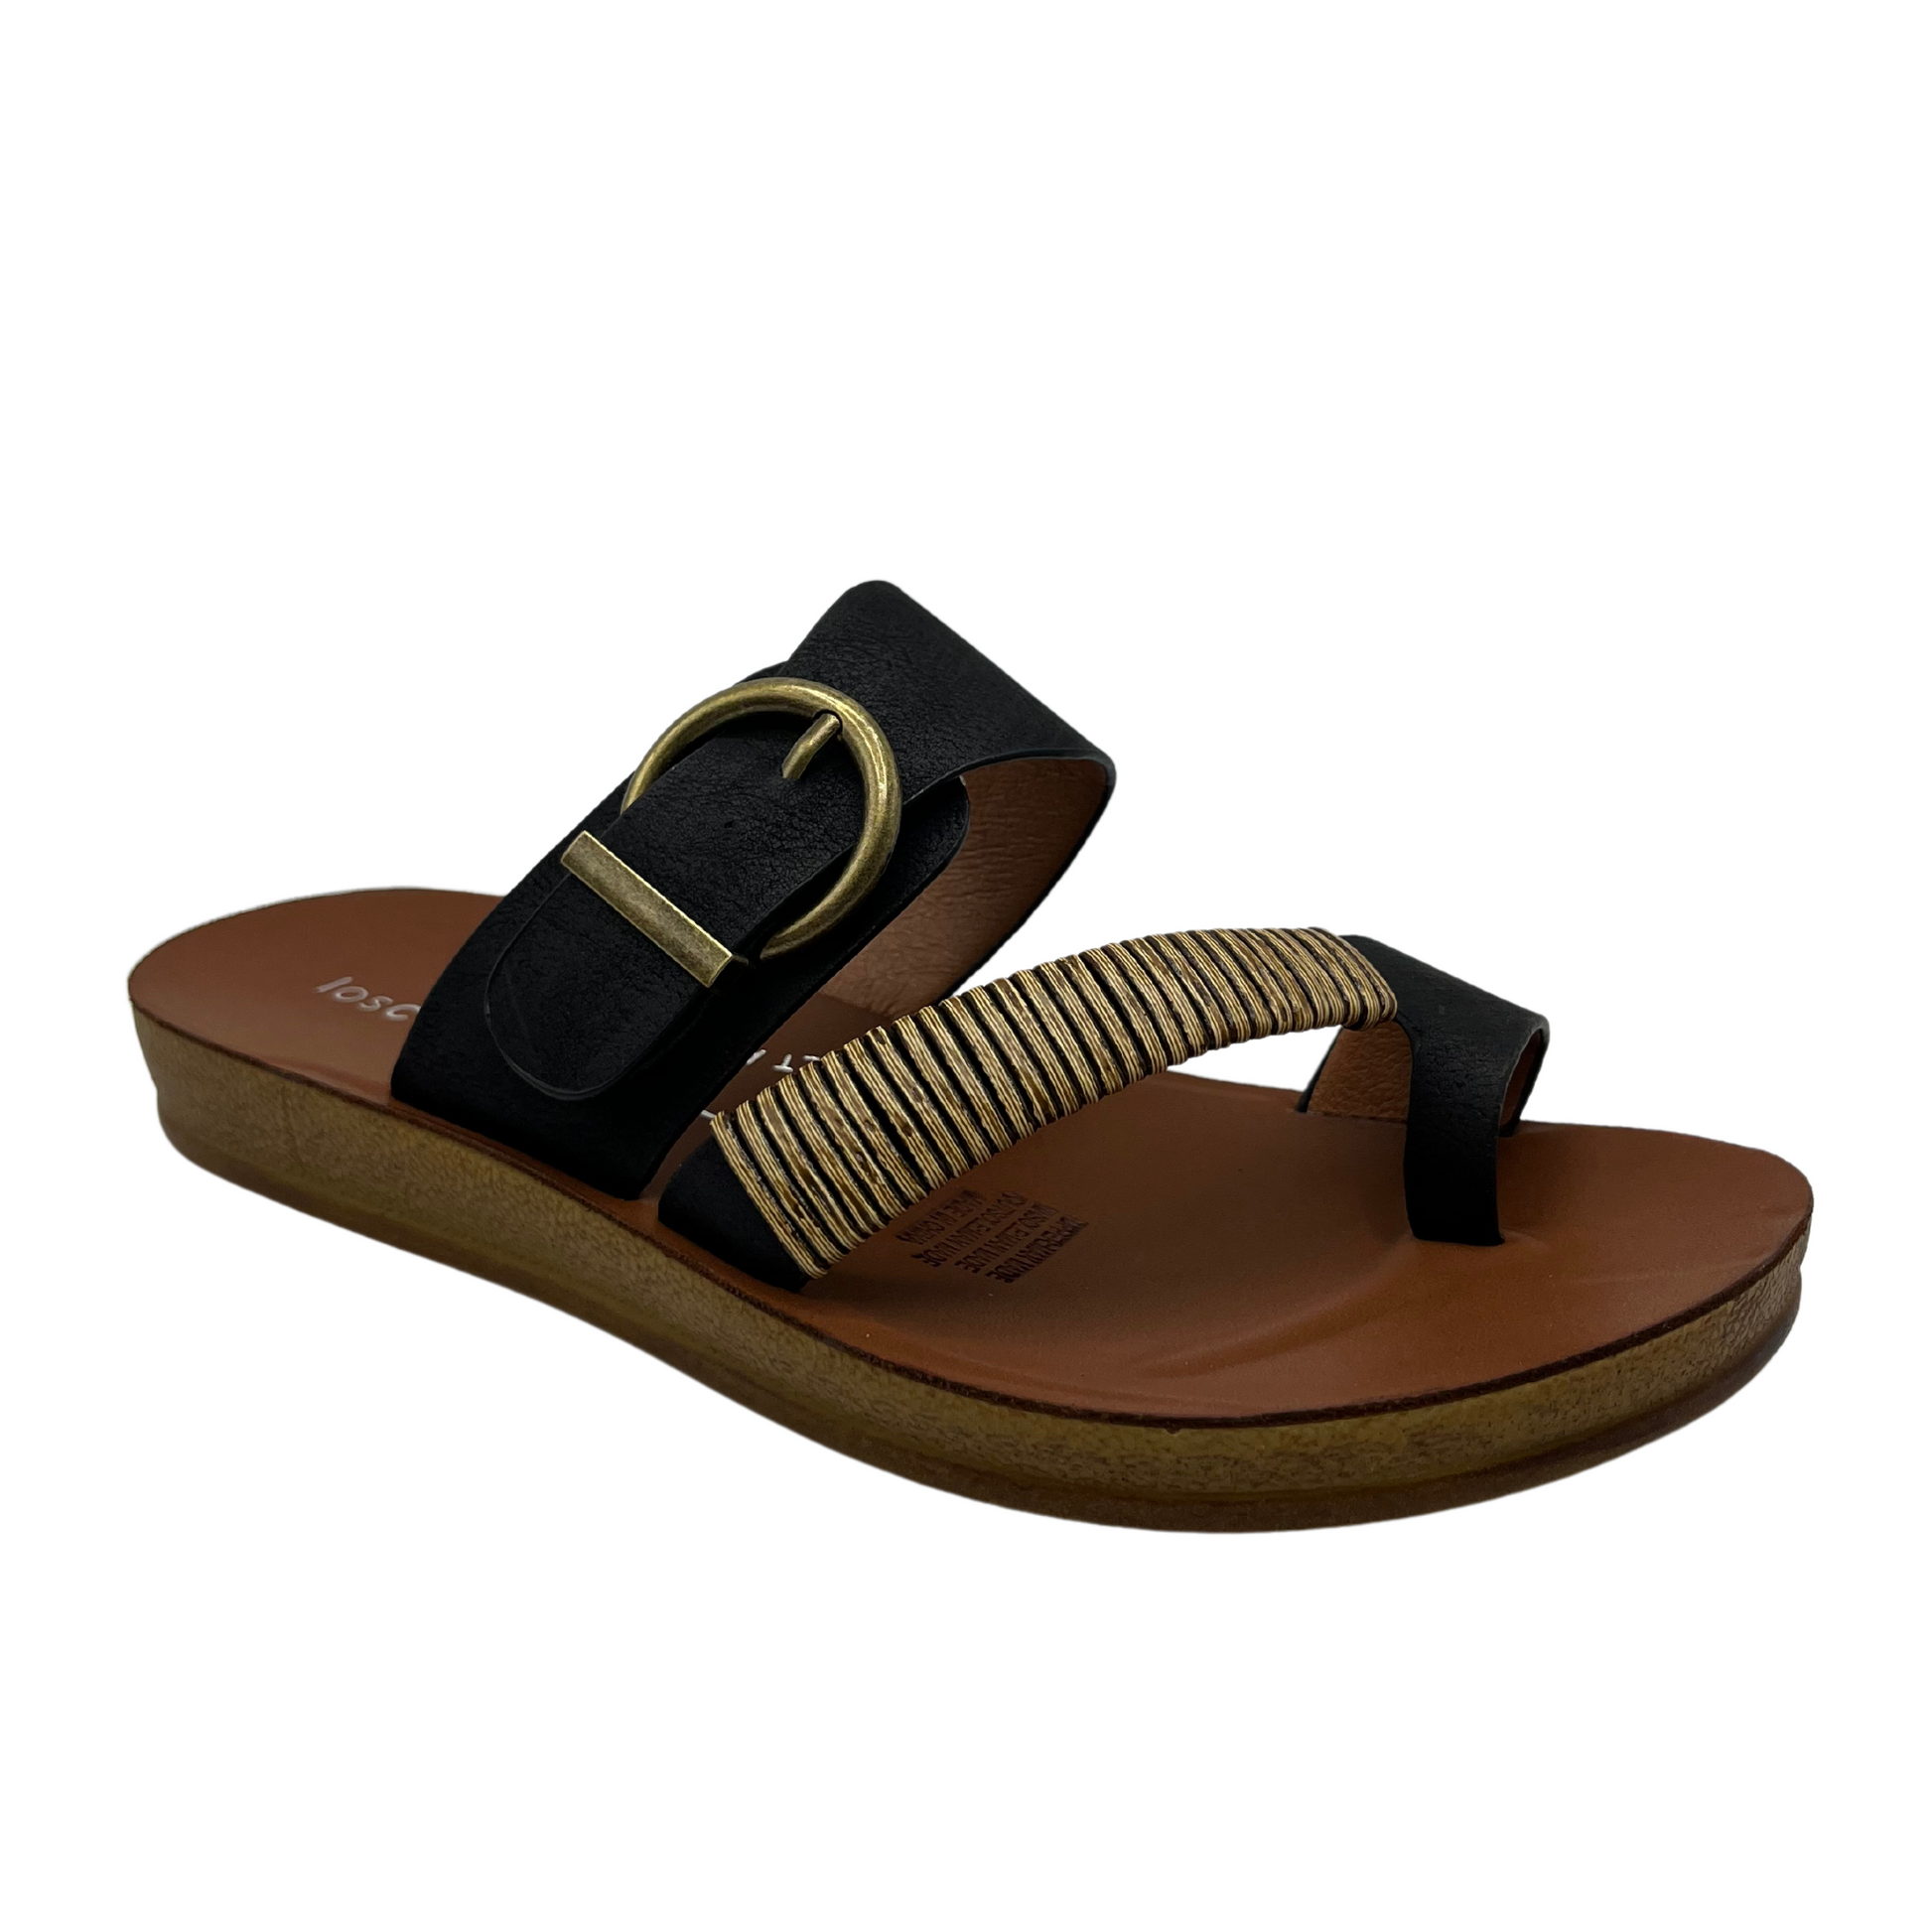 45 degree angled view of black leather sandal with gold buckle and brown insole